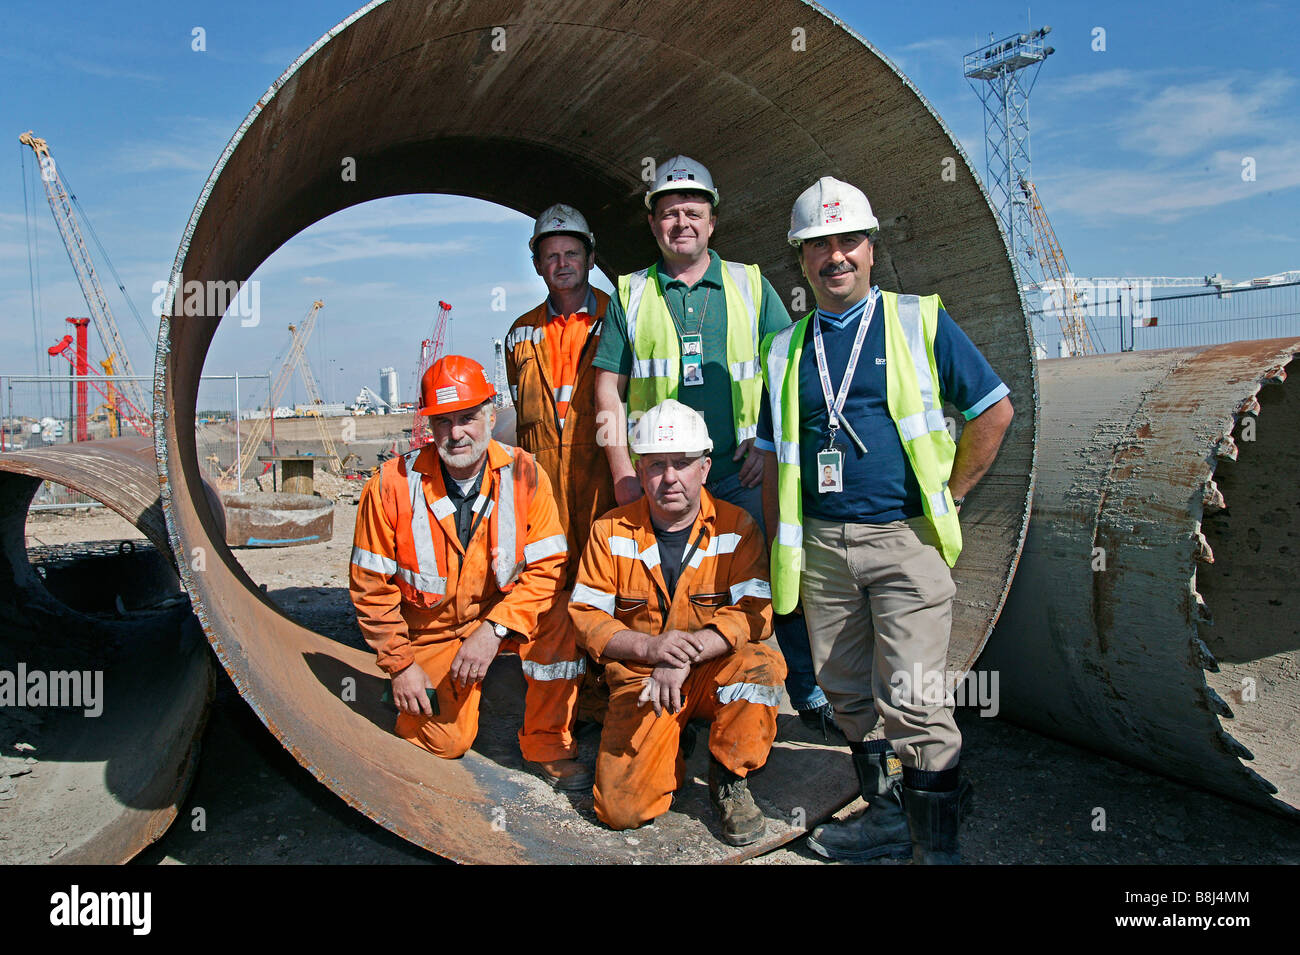 Construction is a collaborative short-term enterprise combining the skills and experience of groups of diverse individuals. Stock Photo